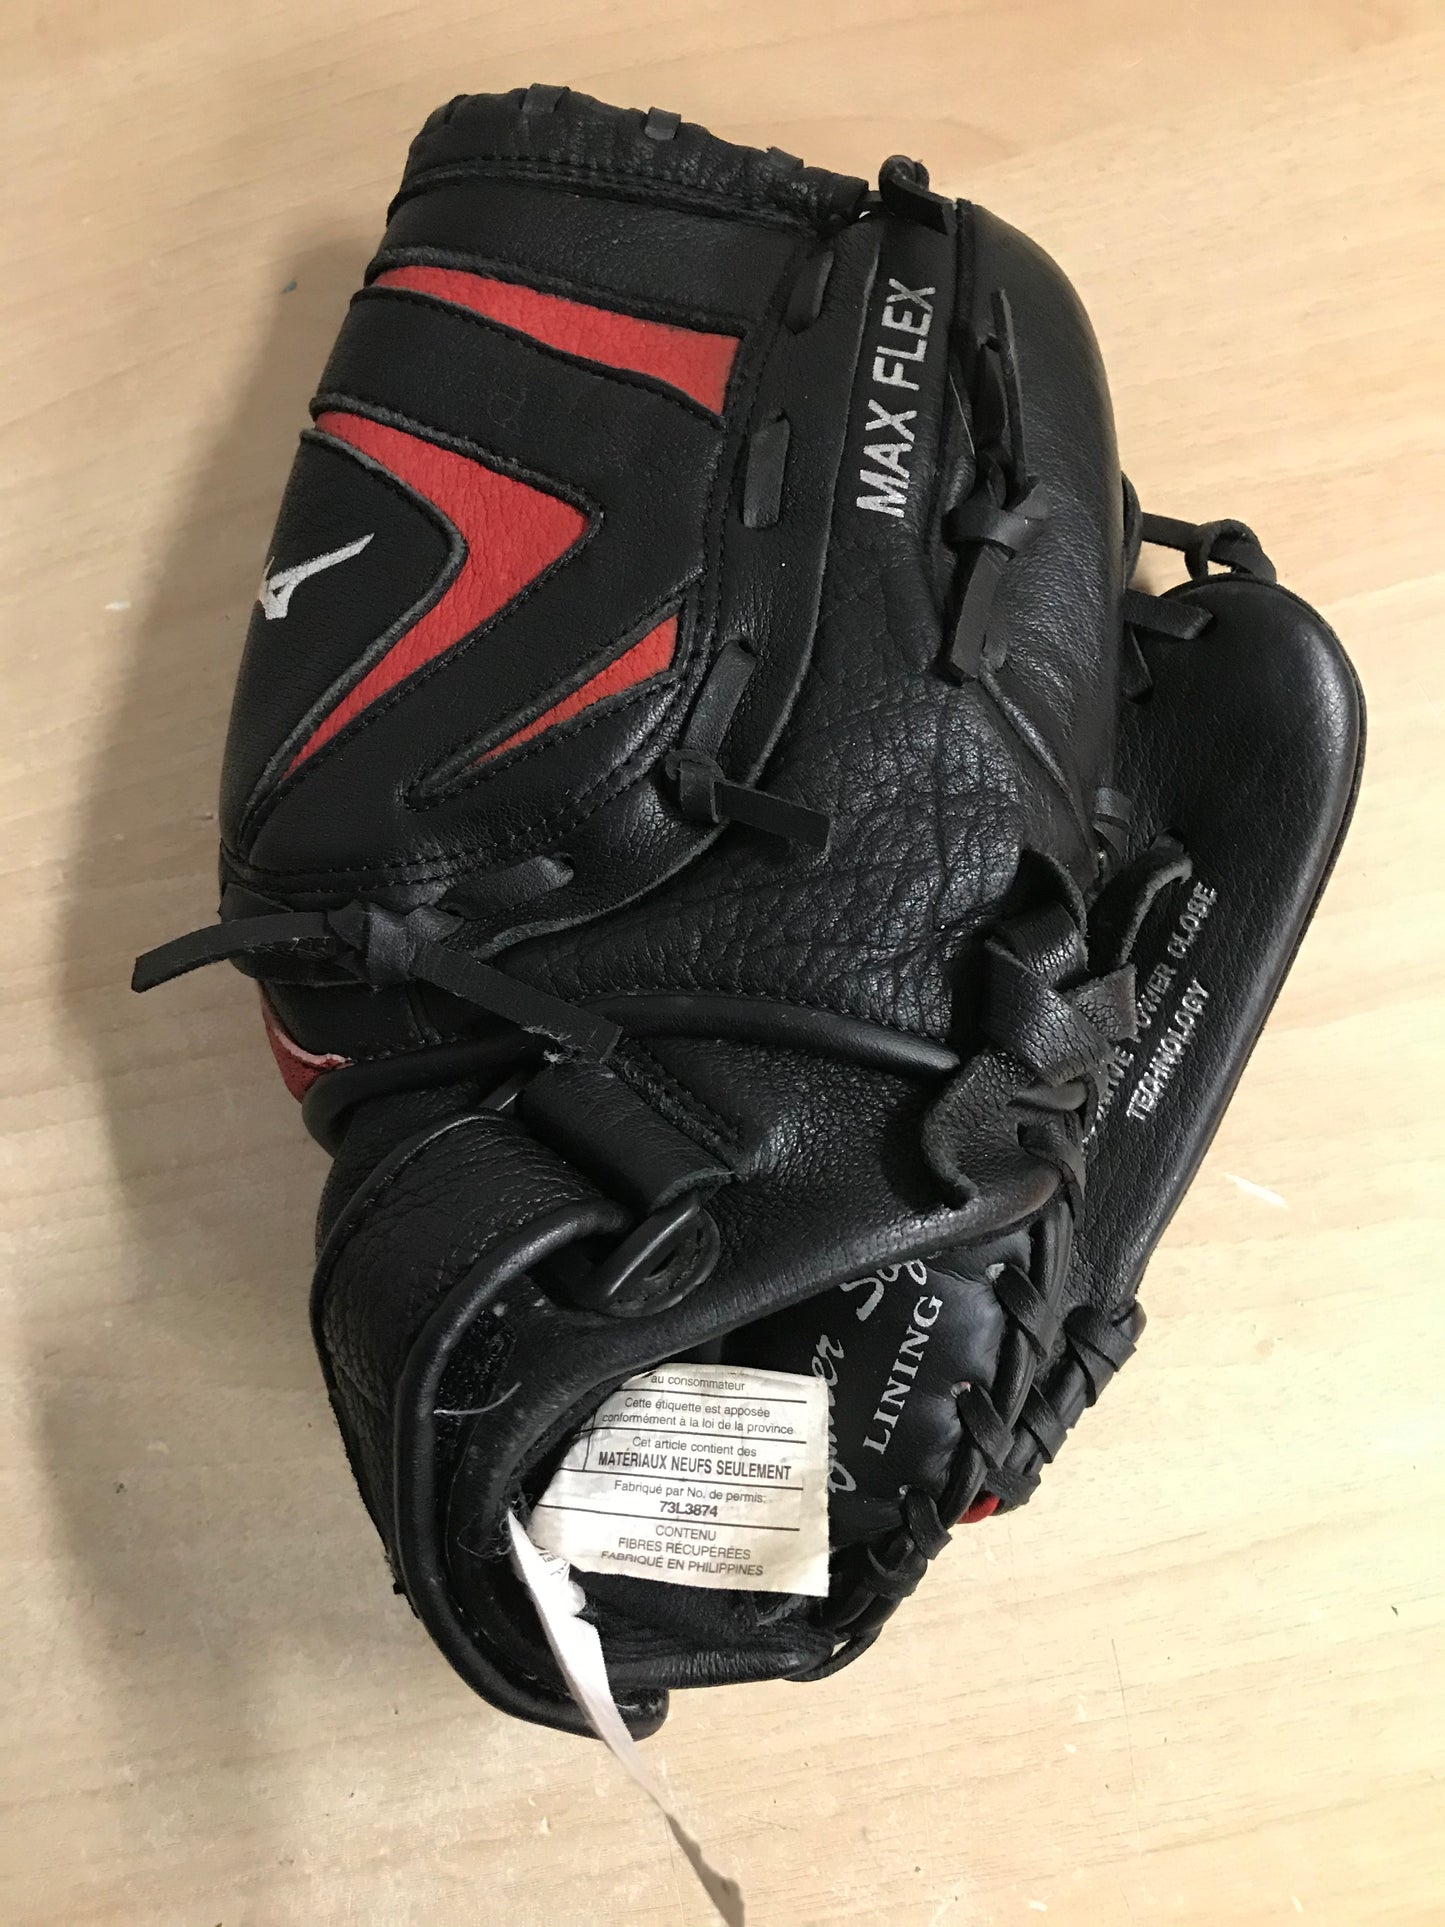 Baseball Glove Adult Size 11.5 inch Mizuno Max Flex Black Red Leather Fits on Left Hand Excellent